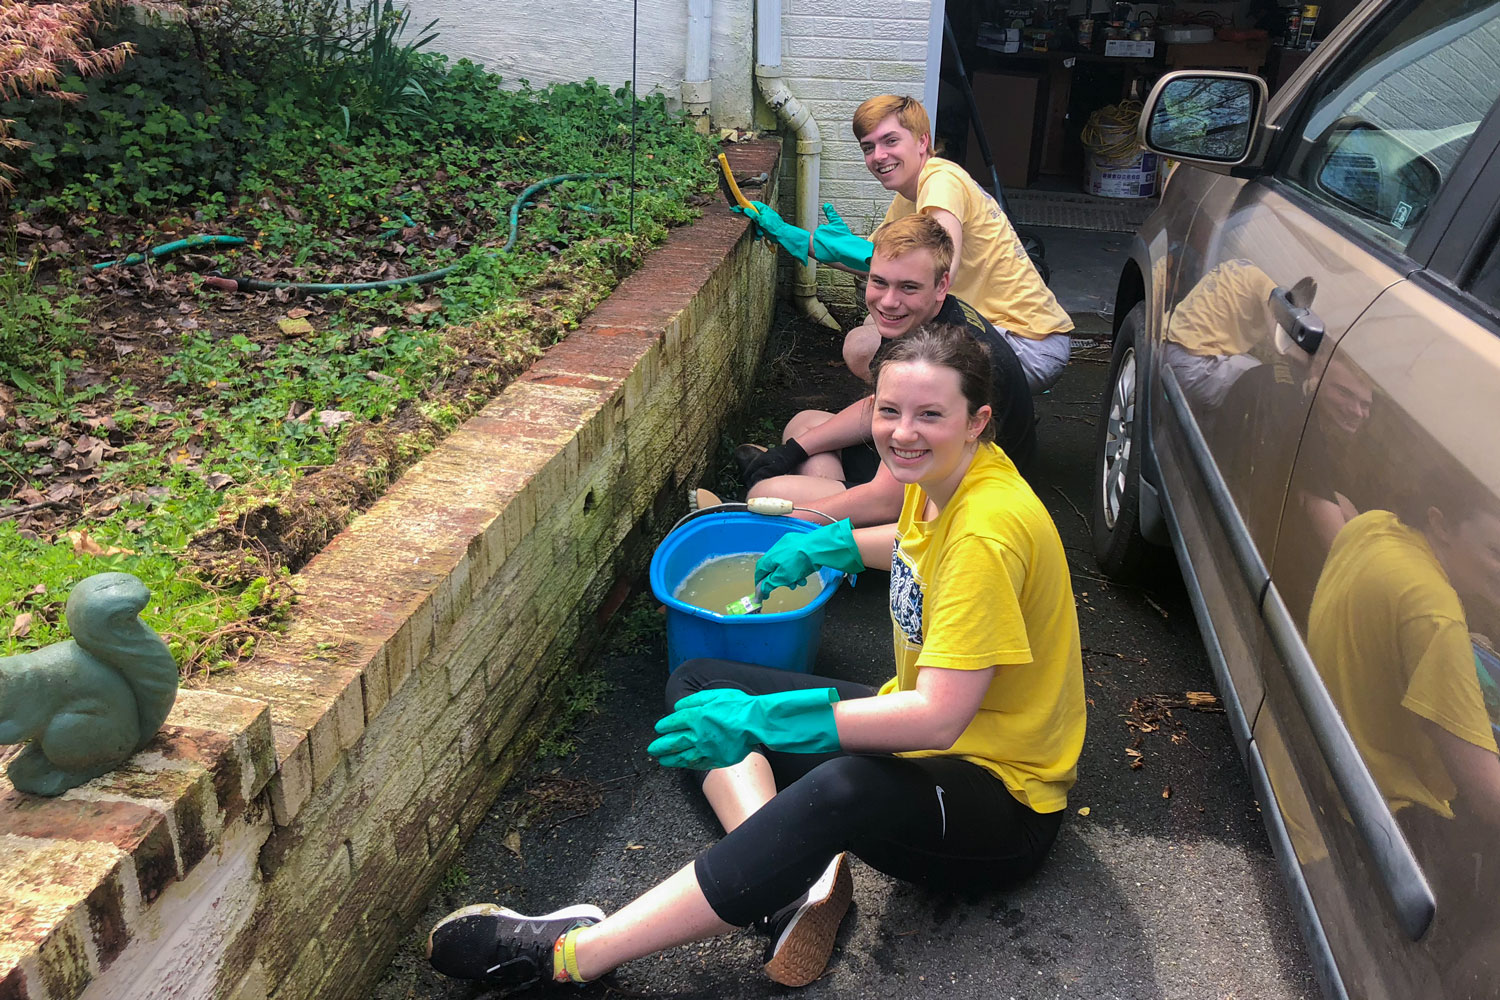 Student volunteers helped clean up outside a private home 